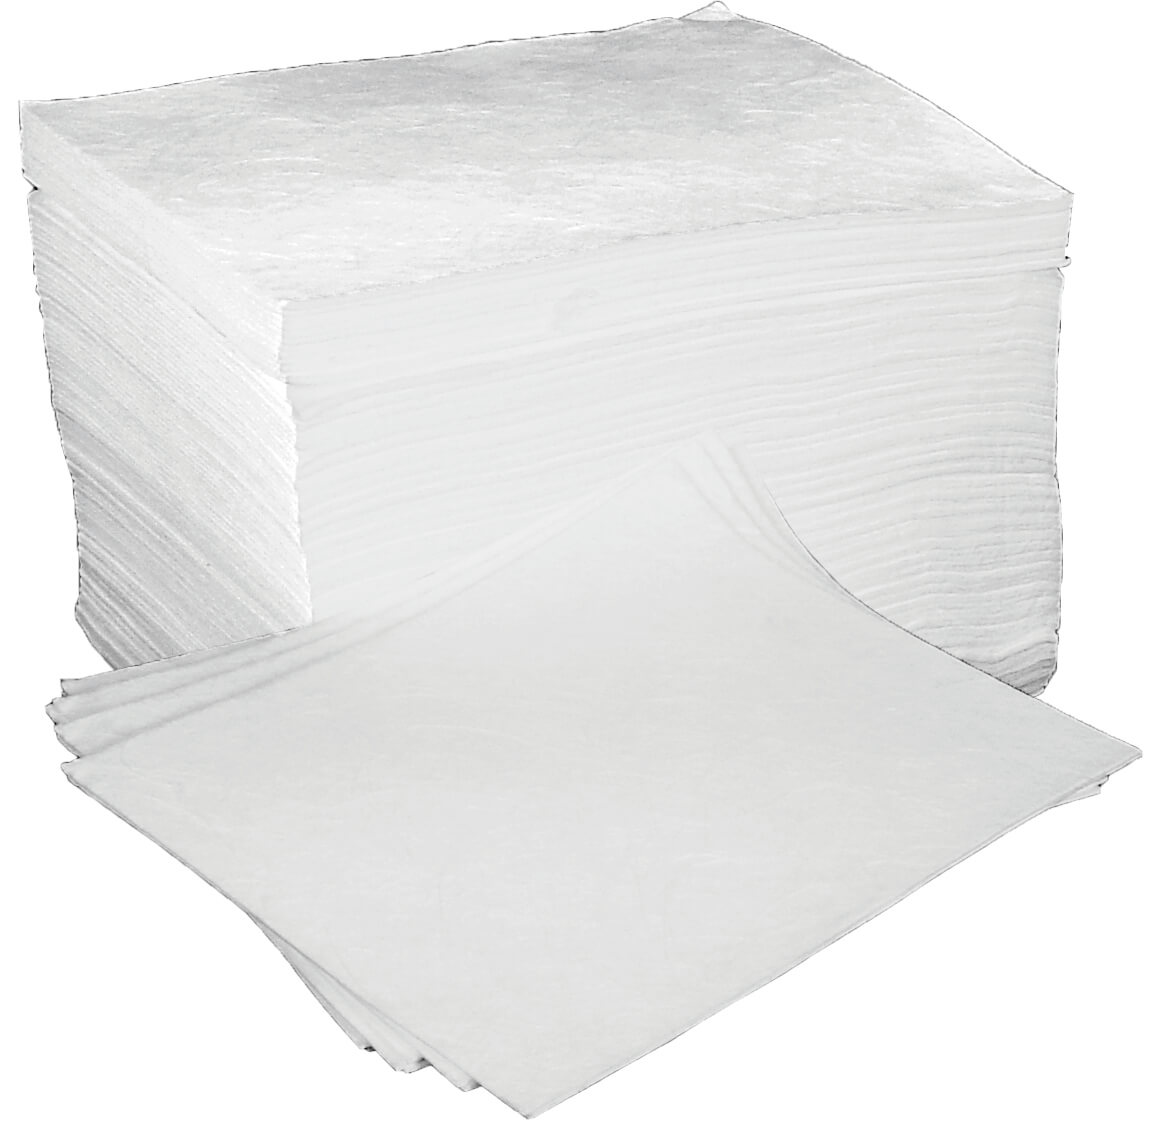 Double-Weight Hydraulic Absorbent Pad - Polywrapped, Pack of 100